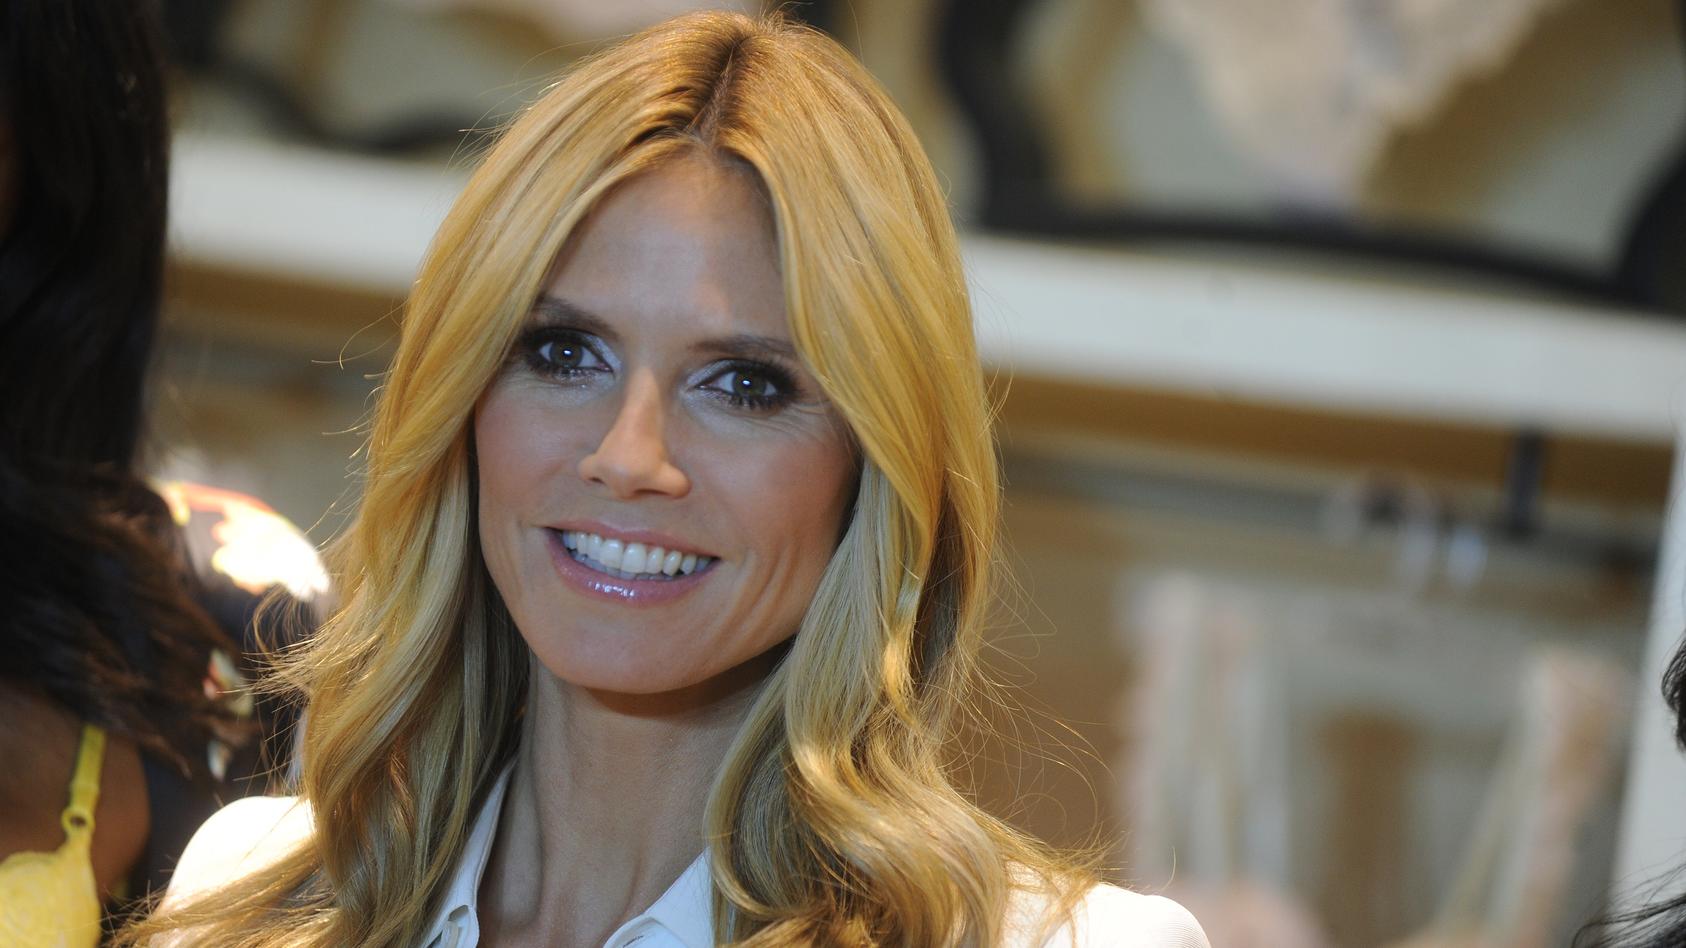 Heidi Klum greets her fans for the launch of her first lingerie collection, Heidi Klum Intimates at Bloomingdale's 59th Street store on March 13, 2015 in New York City.